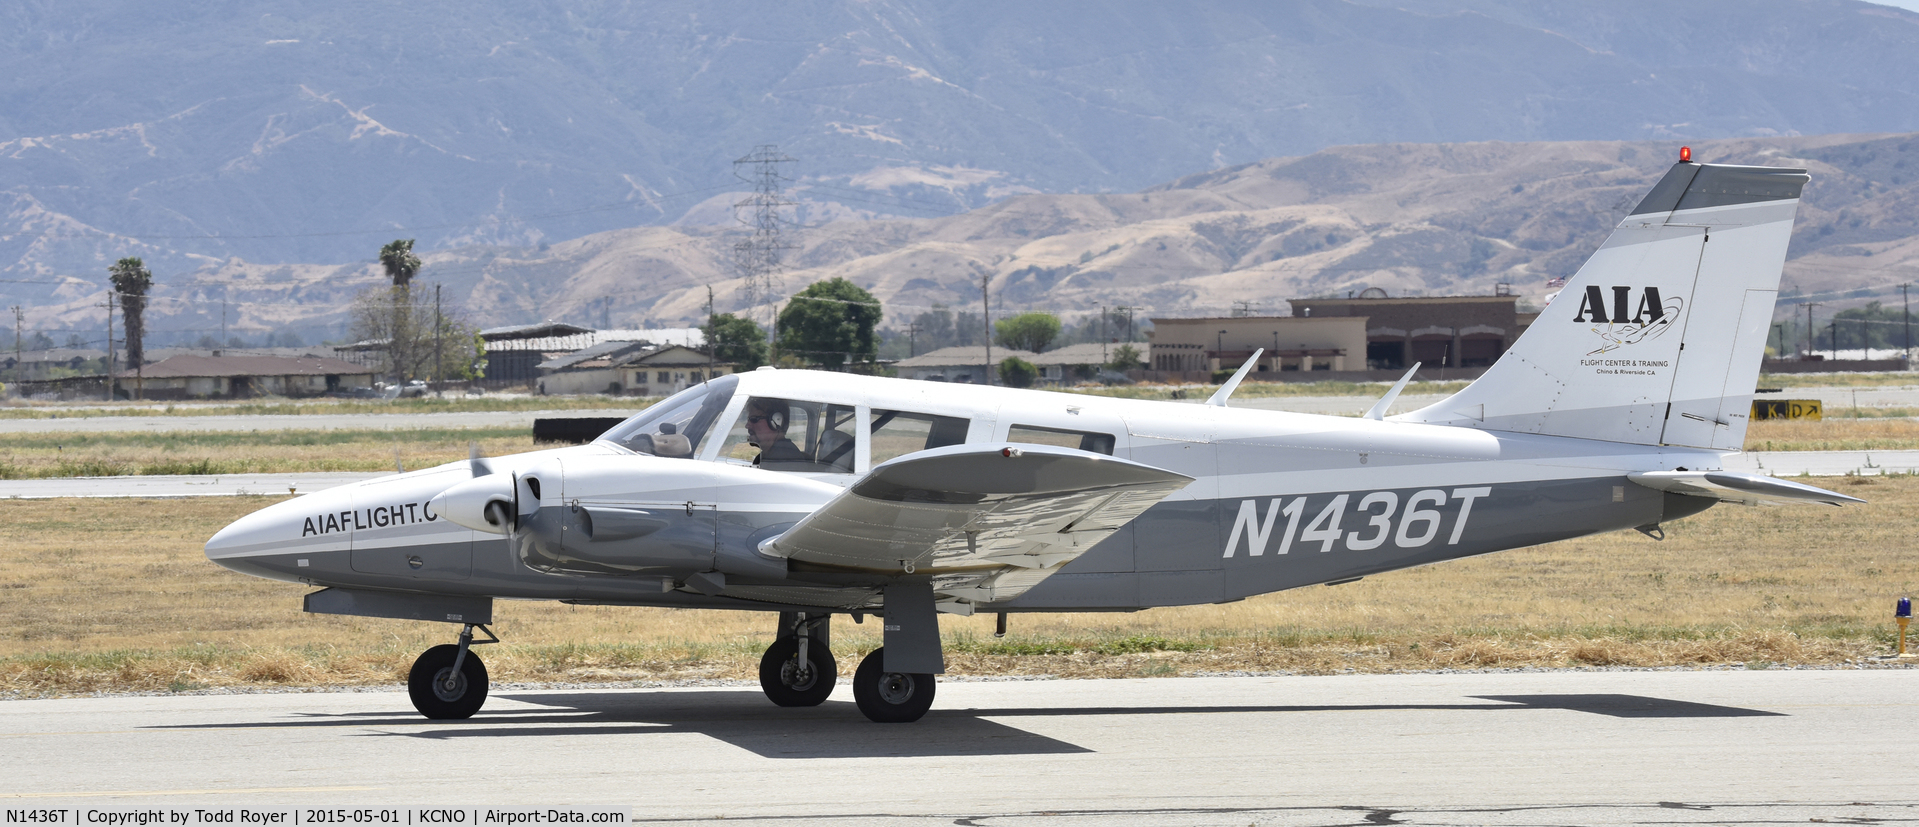 N1436T, 1972 Piper PA-34-200 Seneca C/N 34-7250317, Taxiing for departure at Chino